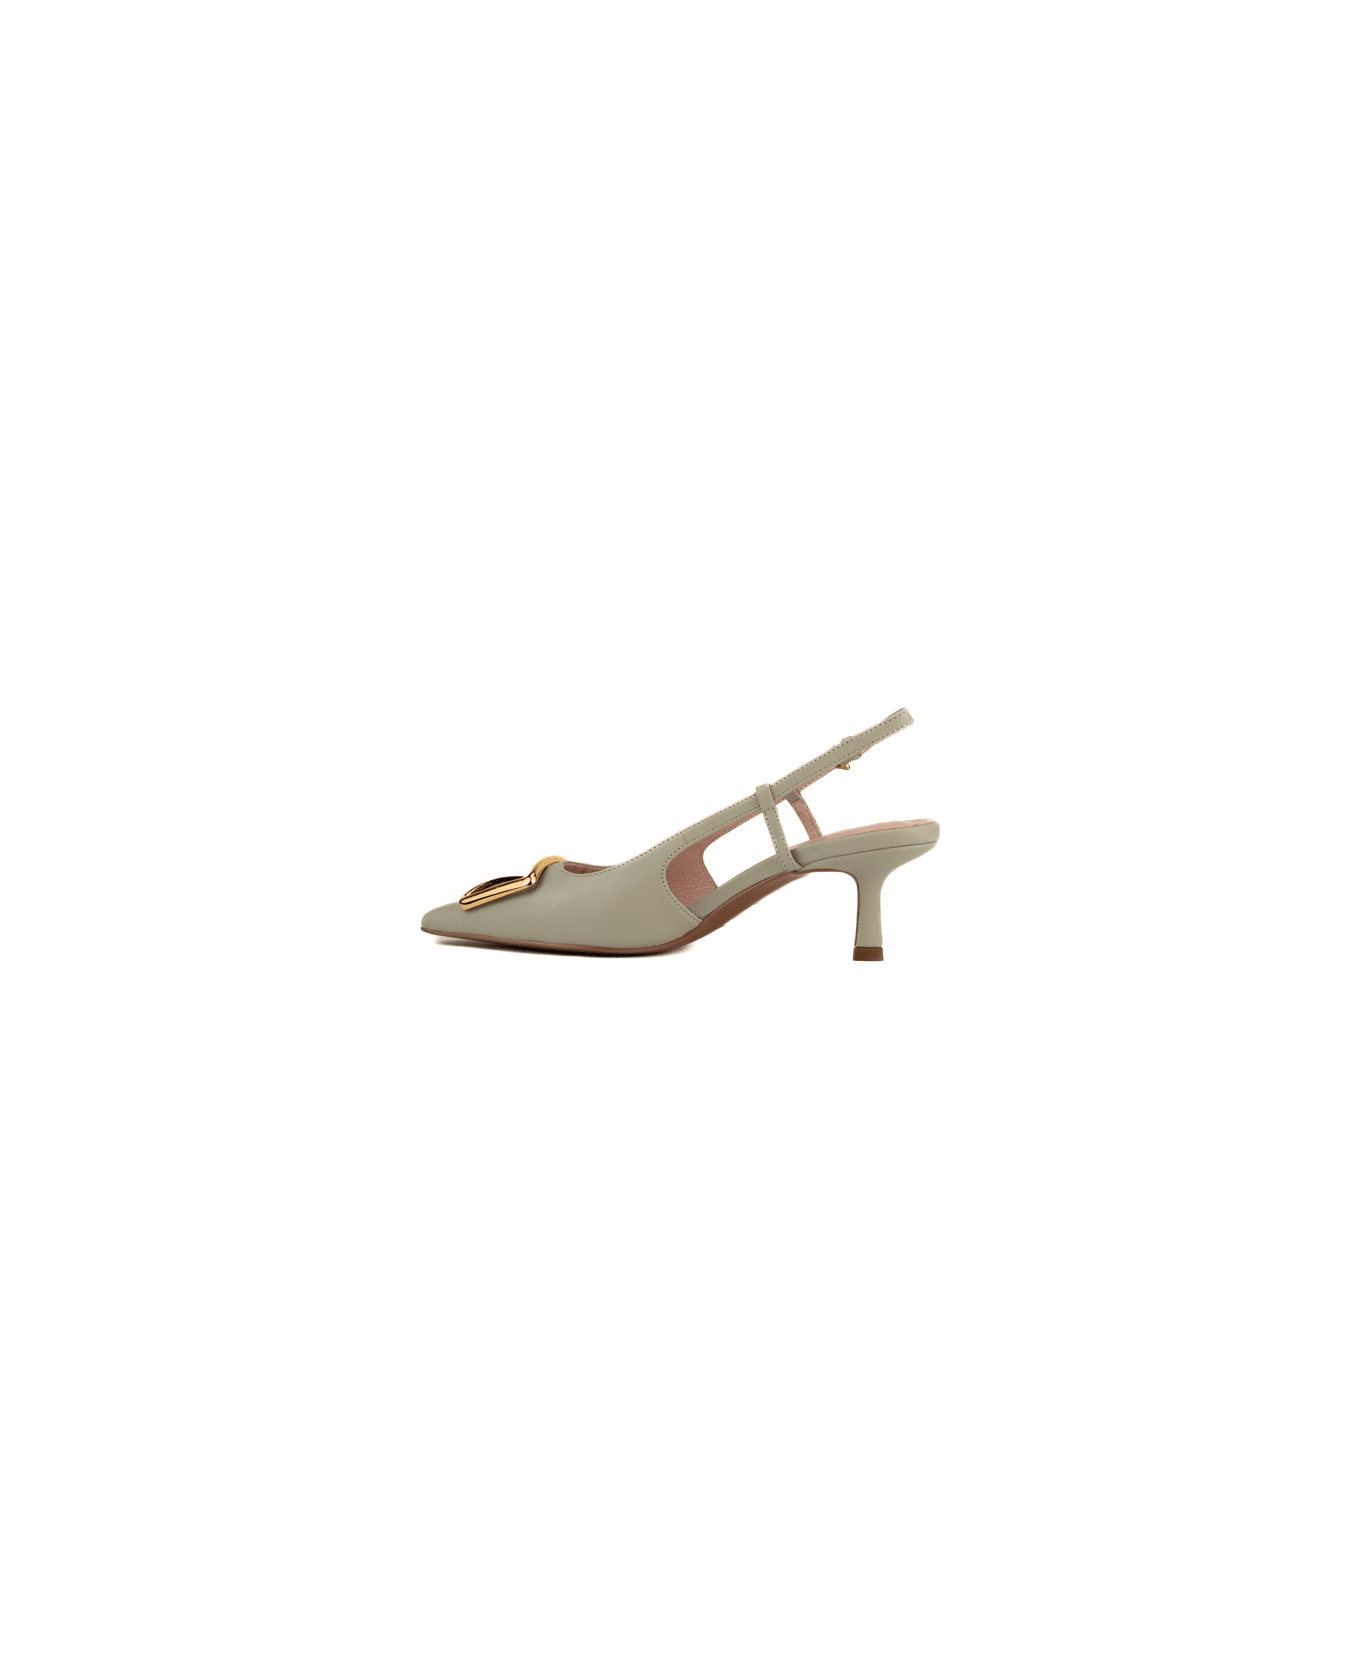 Coccinelle Leather Pumps With Stiletto Heel - Celadon green ハイヒール